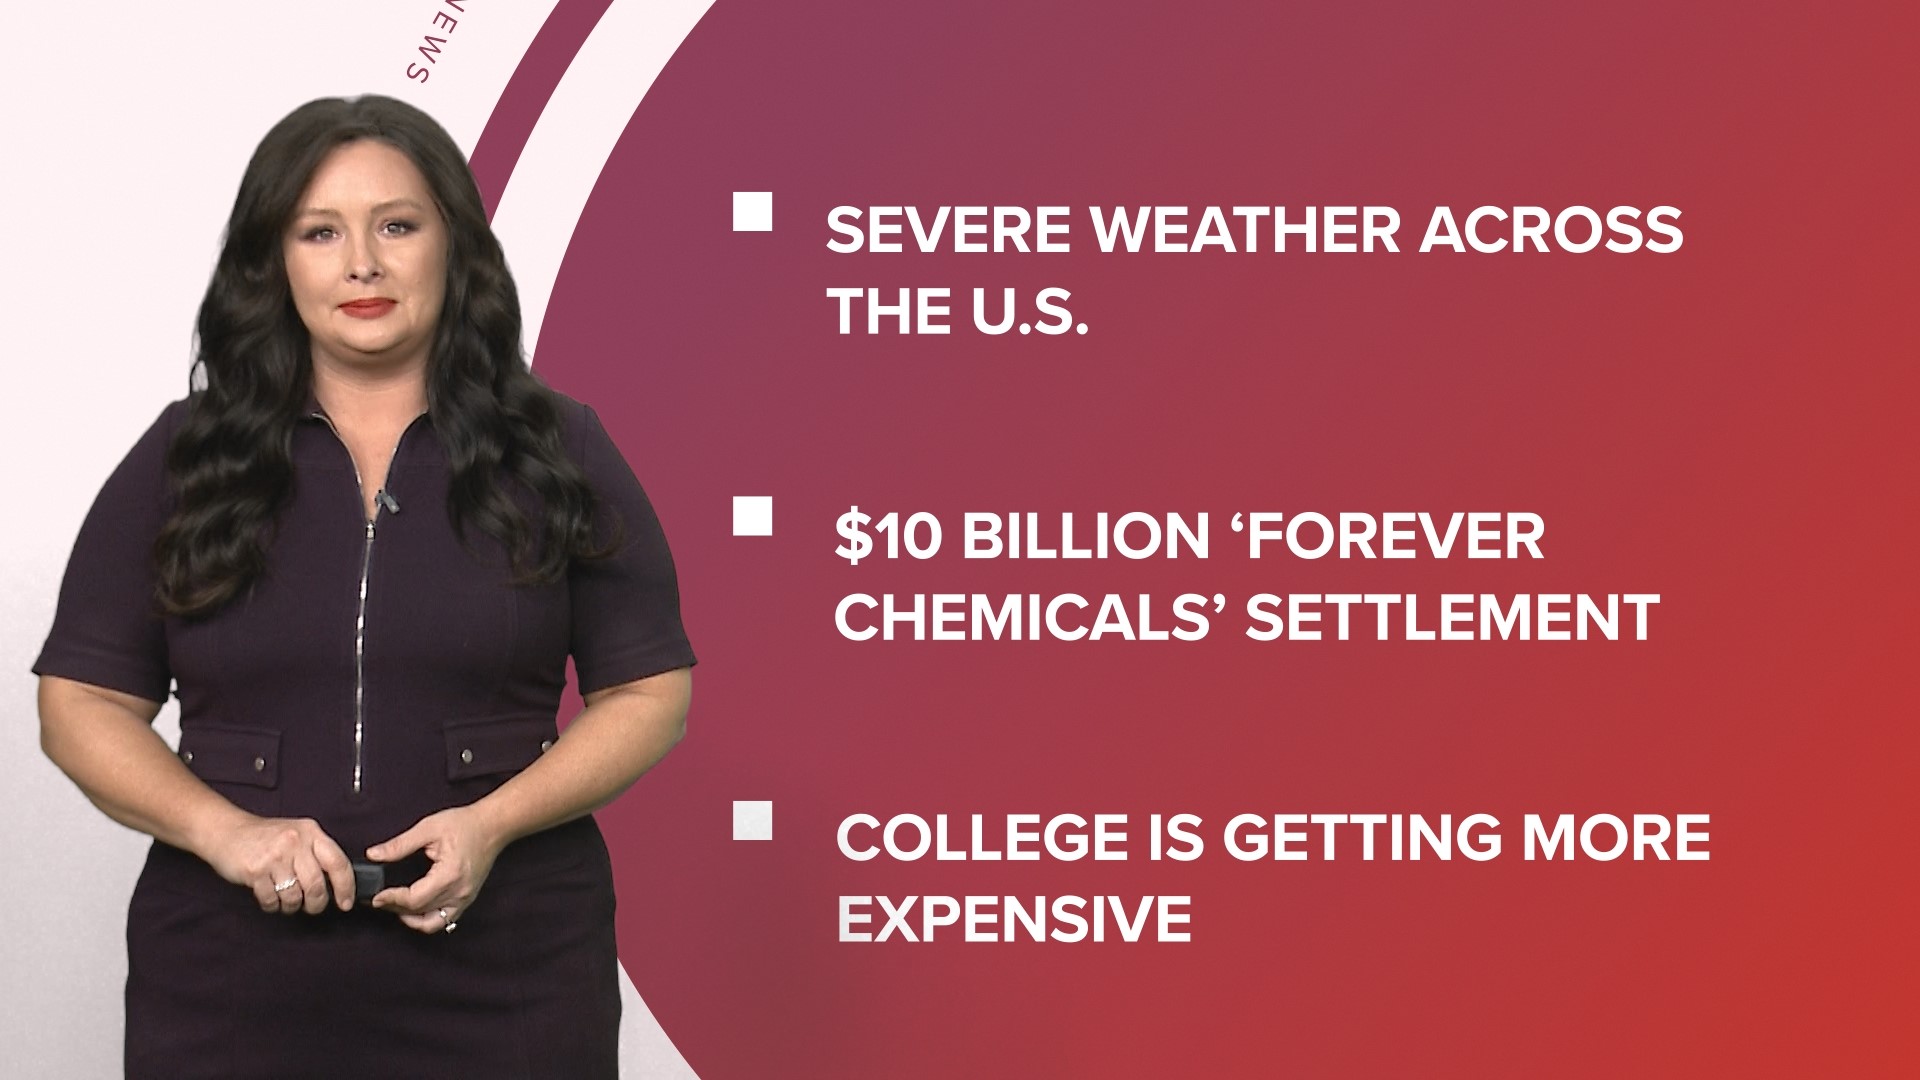 A look at what is happening in the news from severe weather across the U.S. to solar eclipse eye safety and college is getting expensive.